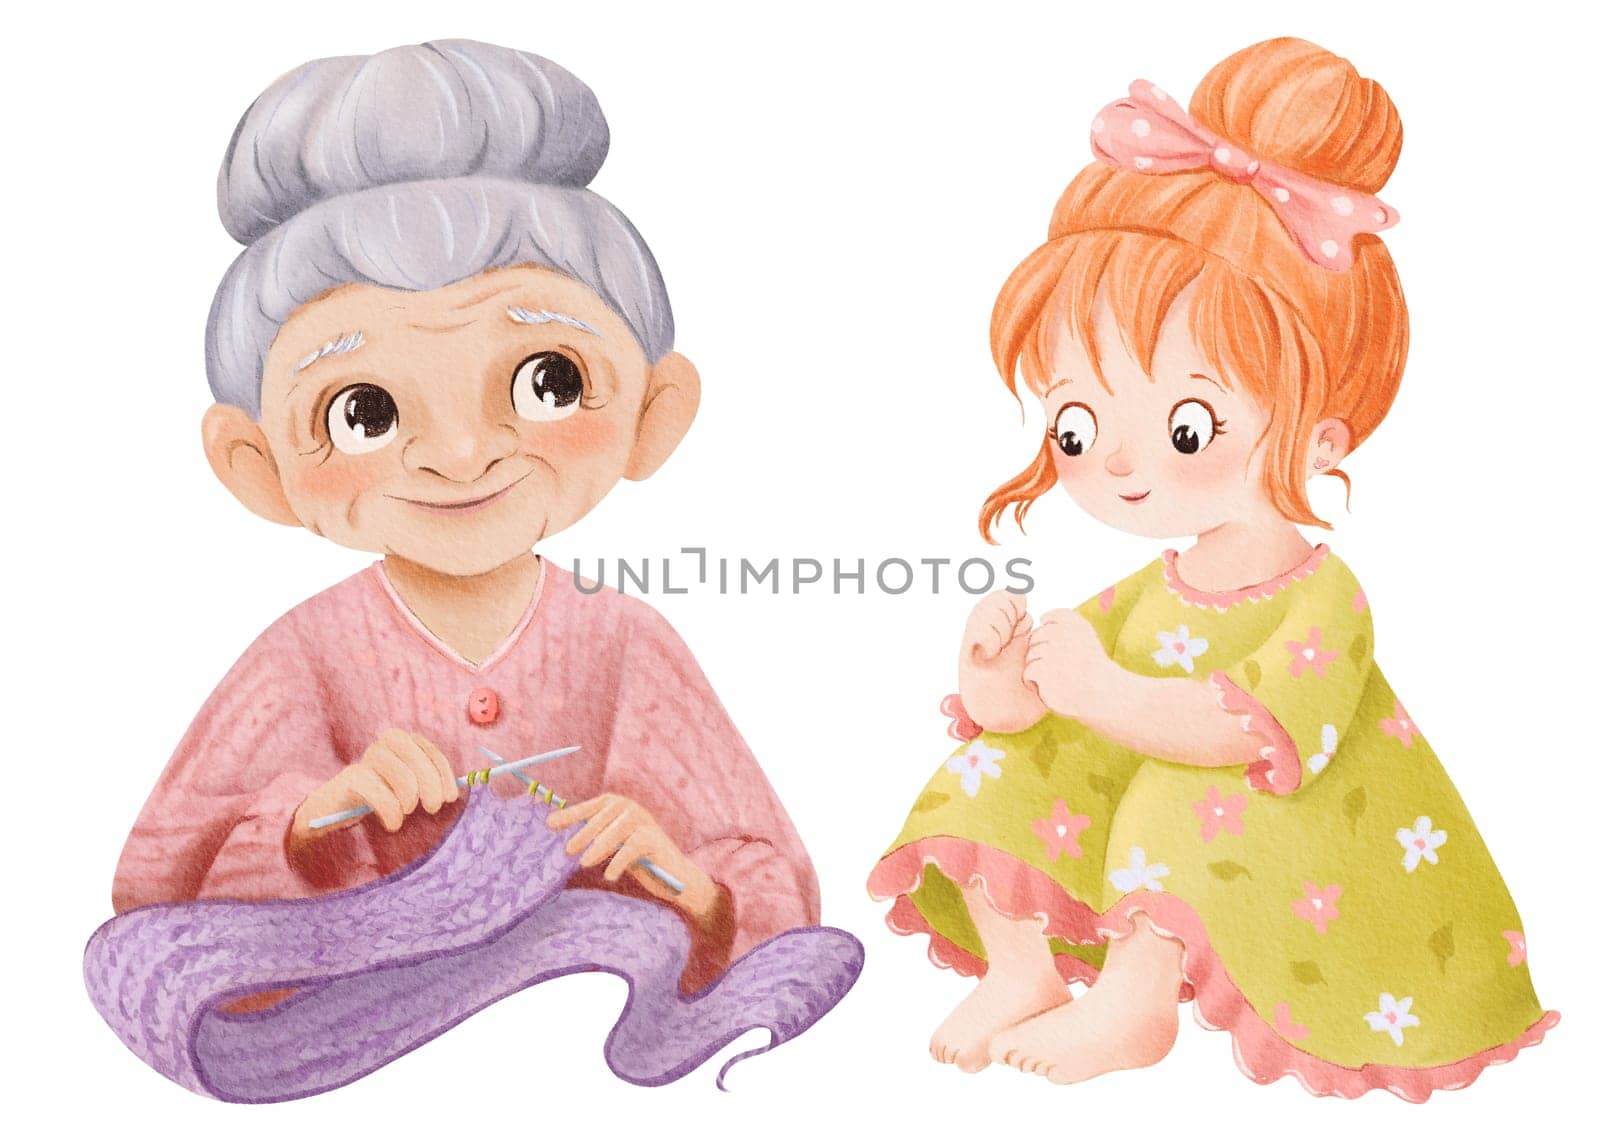 Watercolor character set. A grandmother knitting portrays. a cheerful little girl with big eyes. for children's book illustrations, family-themed designs, greeting cards, and storytelling visuals.